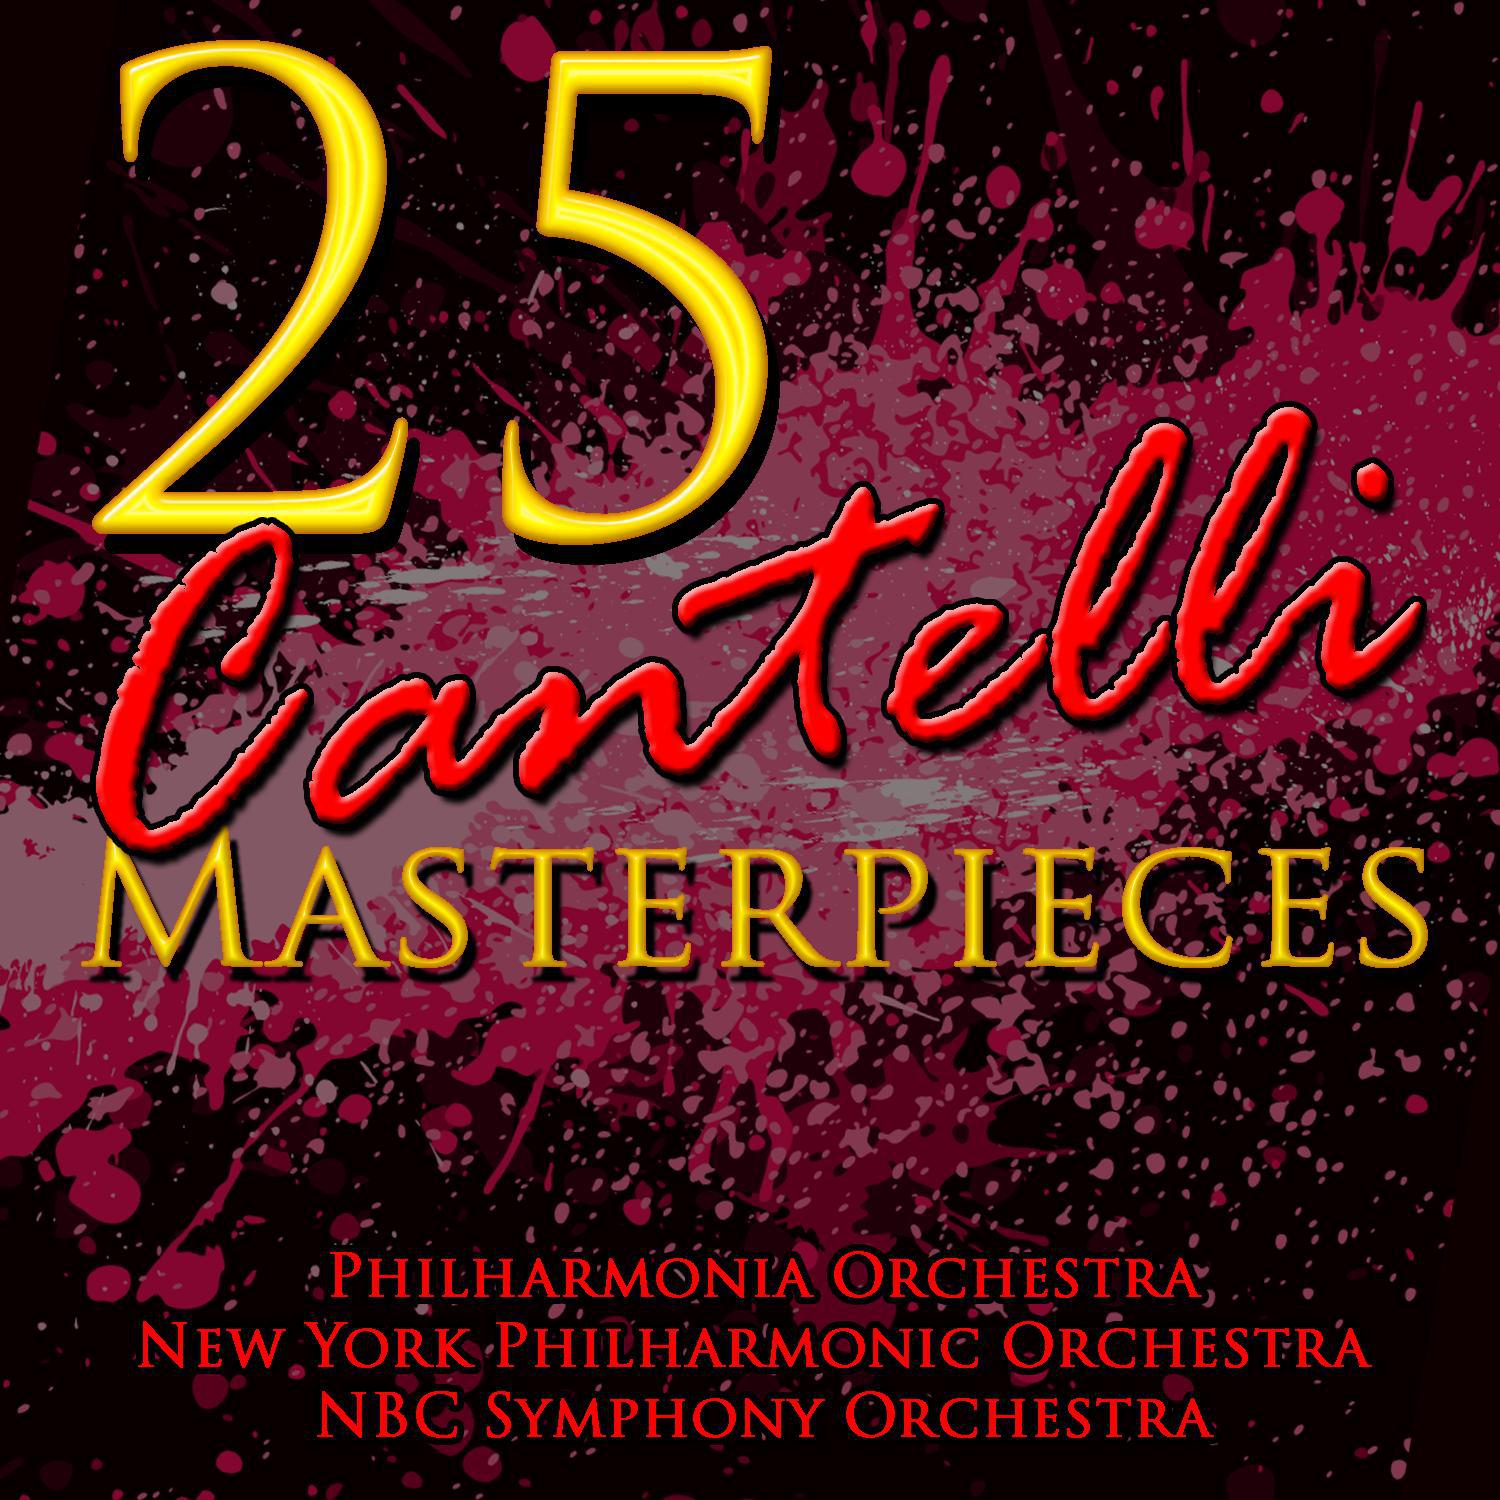 25 Cantelli Masterpieces